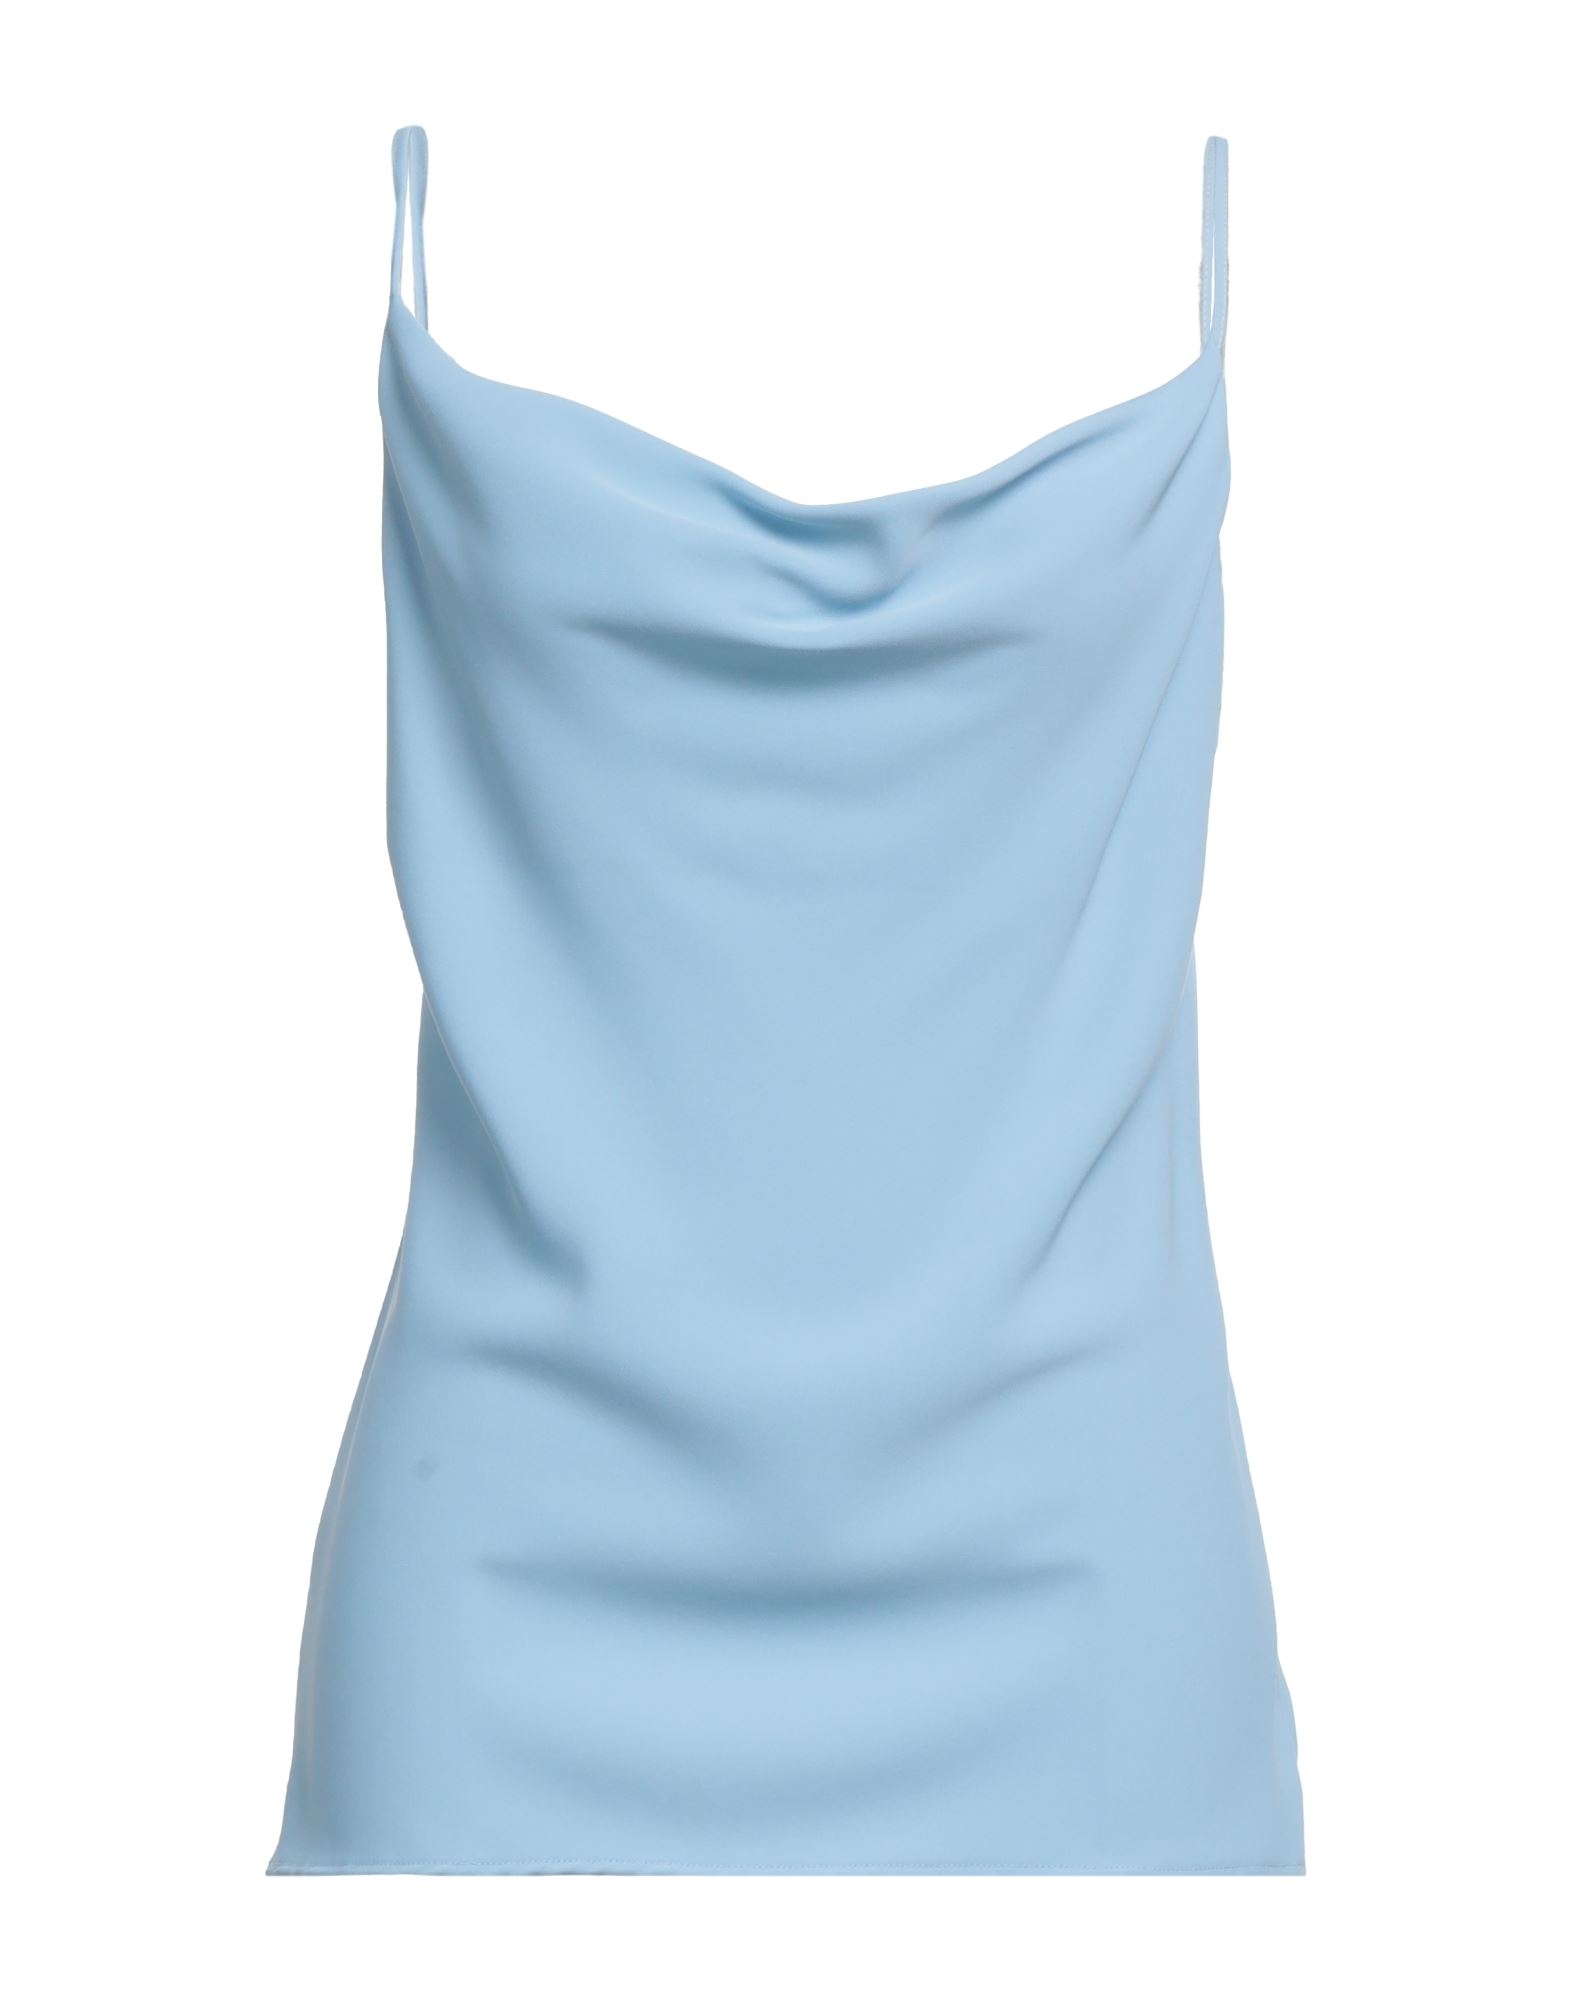 P.A.R.O.S.H P. A.R. O.S. H. WOMAN TOP SKY BLUE SIZE S POLYESTER